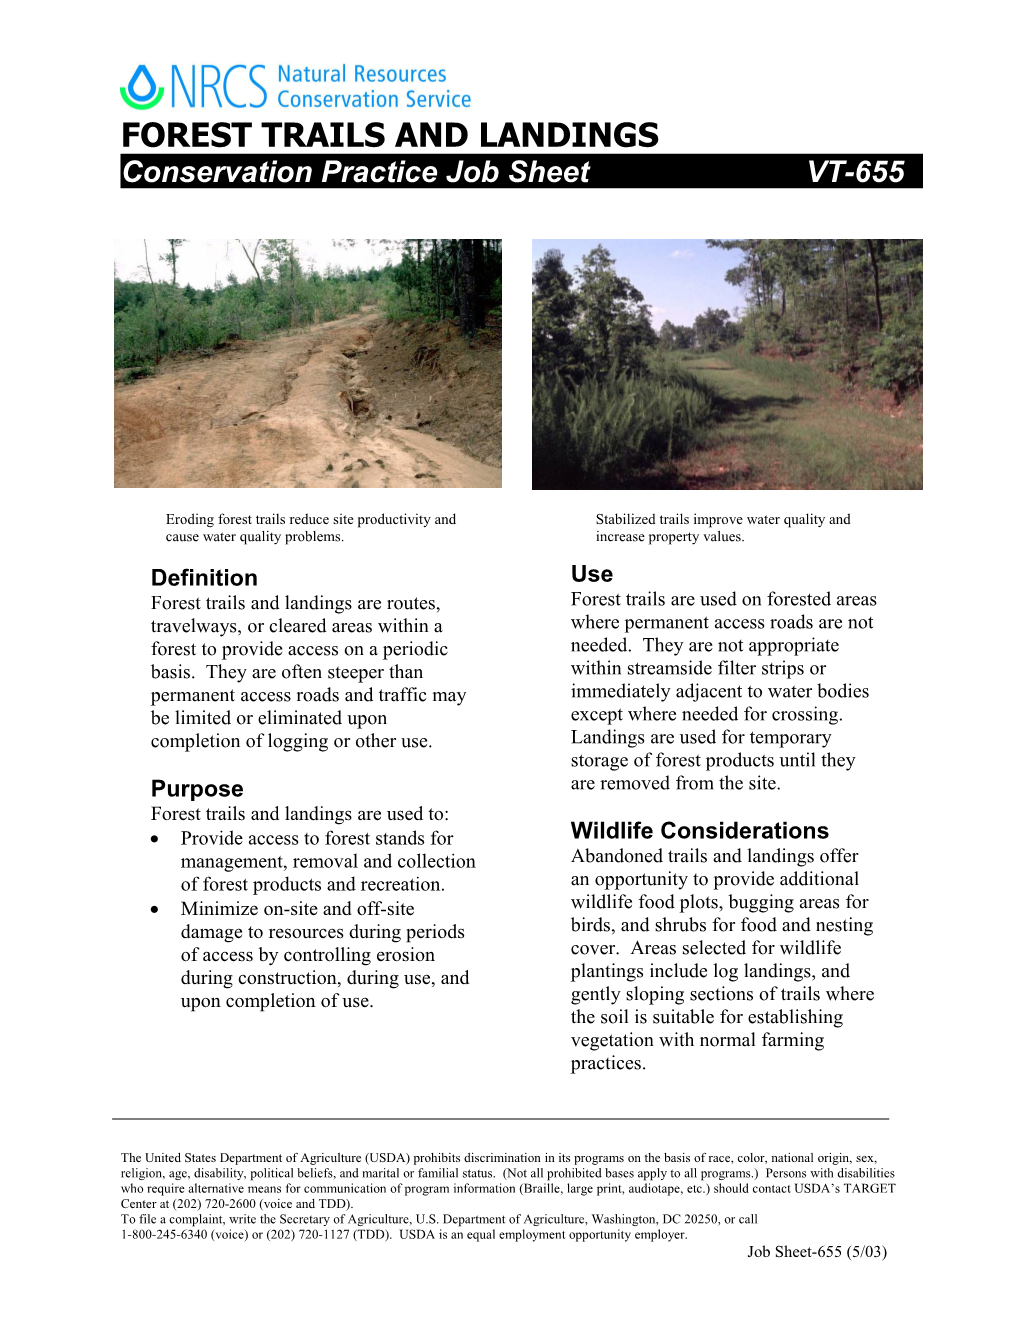 Erosion Control for Forest Trails and Landings